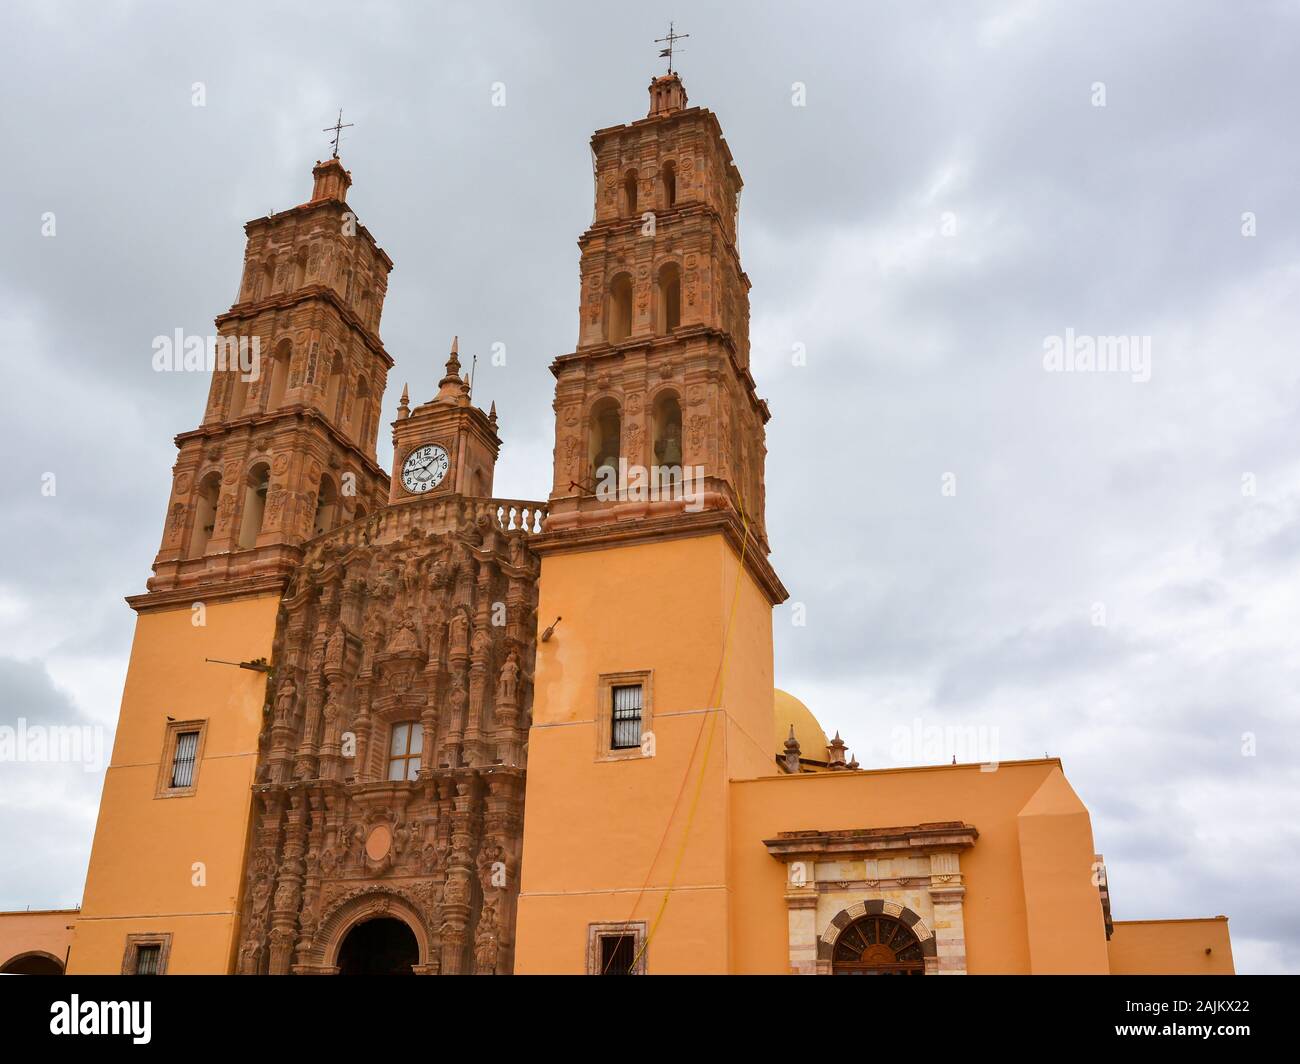 Church of Our Lady of Sorrows - Dolores Hidalgo, Mexico. Stock Photo